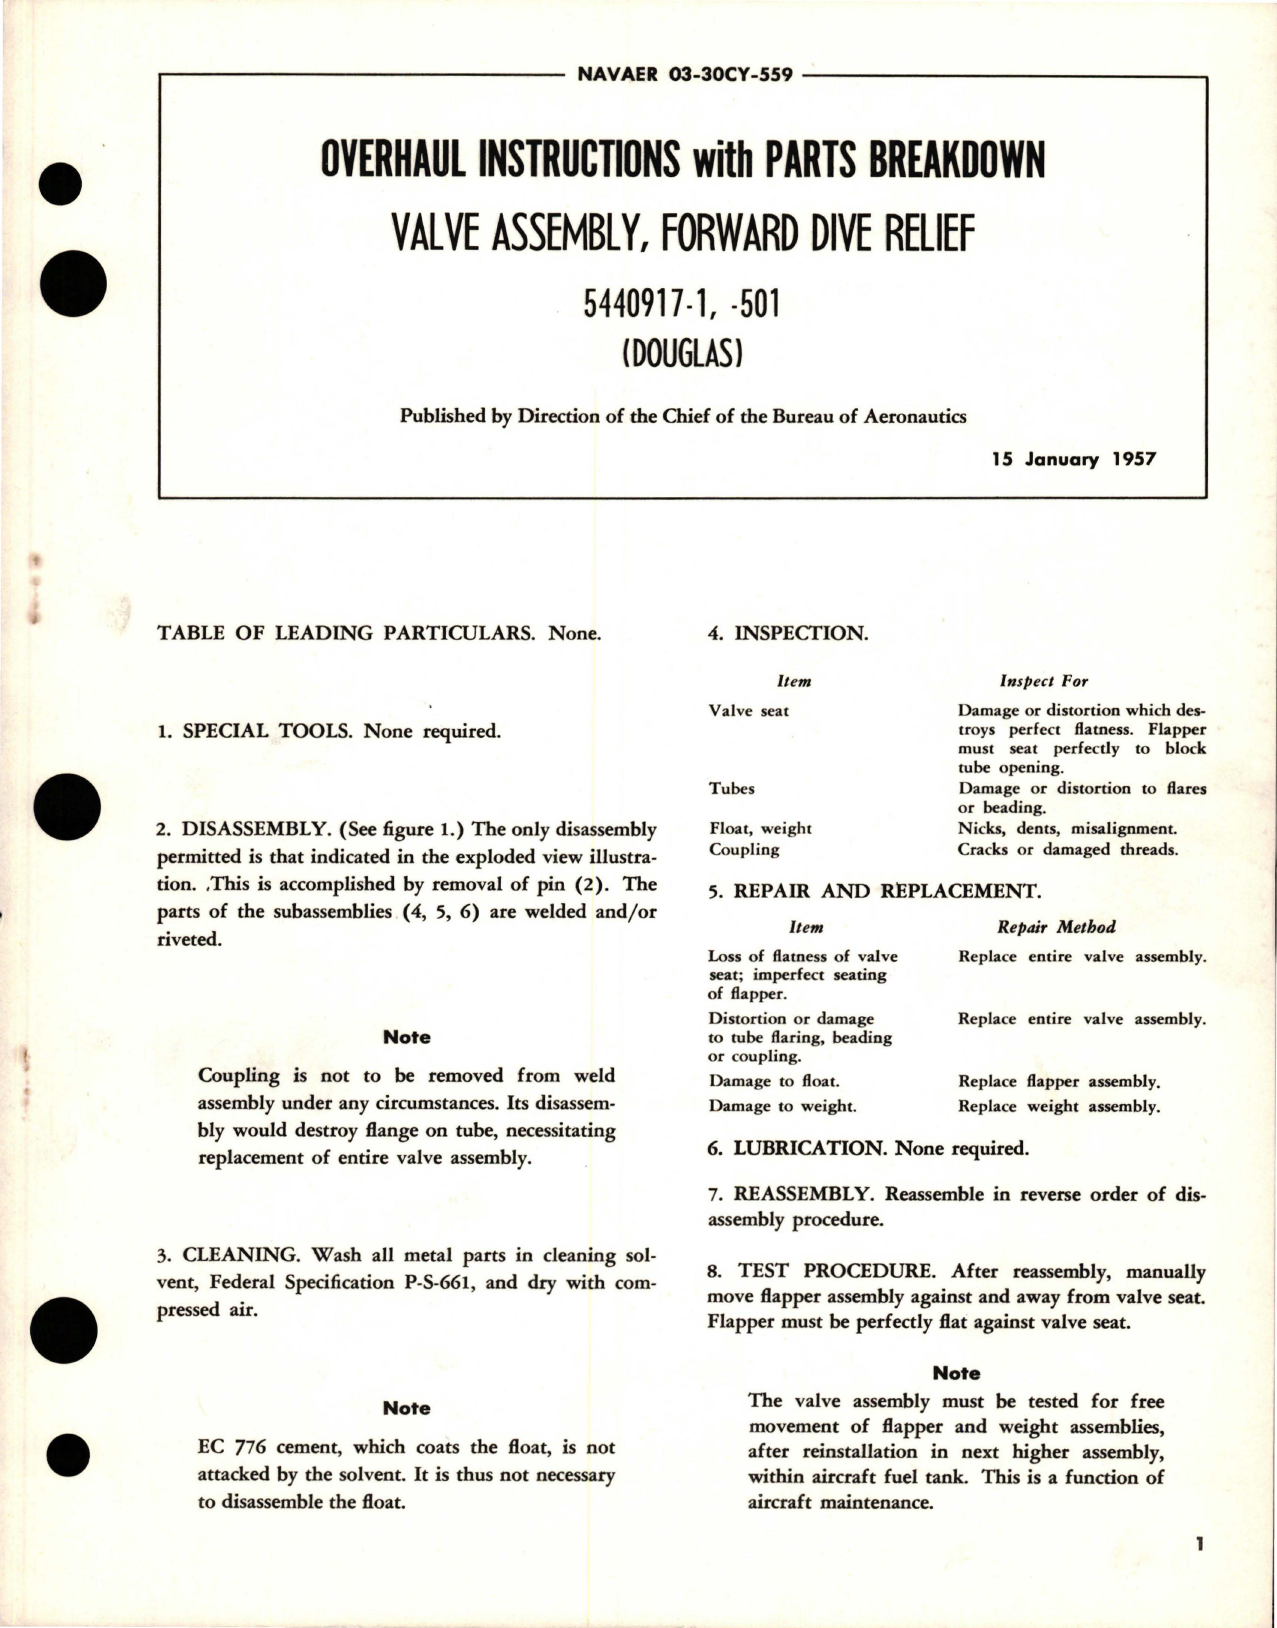 Sample page 1 from AirCorps Library document: Overhaul Instructions with Parts Breakdown for Forward Dive Relief Valve Assembly - 5440917-1, 5440917-501